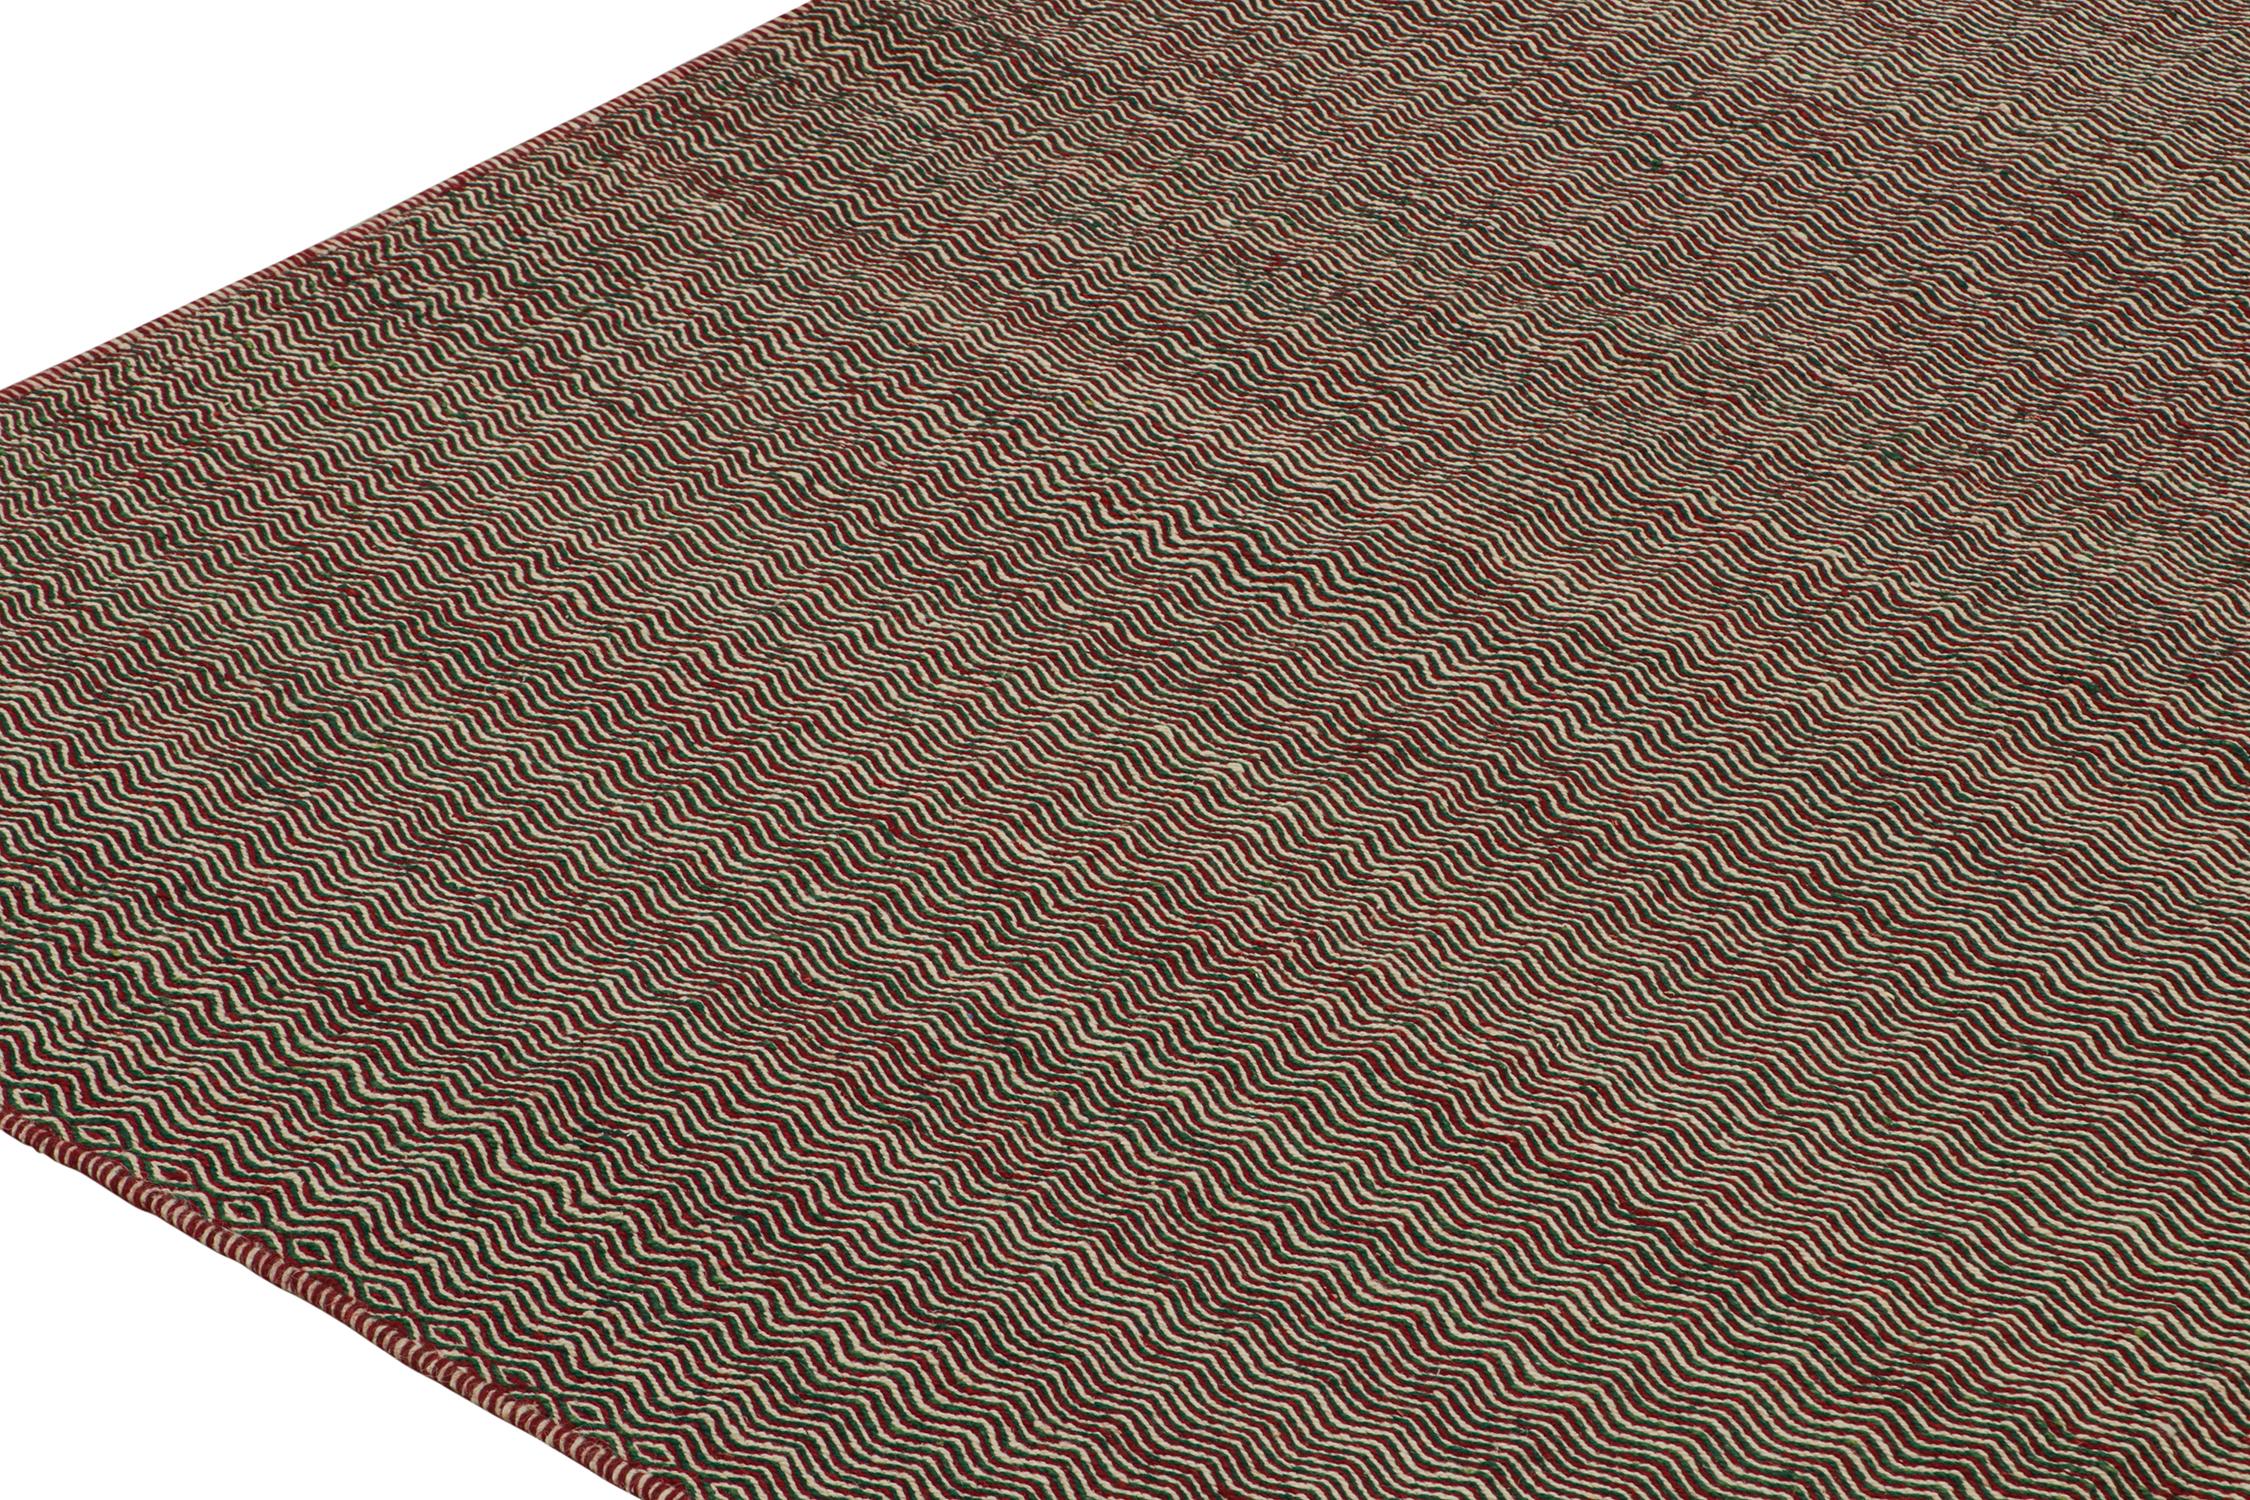 Hand-Knotted Rug & Kilim’s Contemporary Kilim Rug in Red, Green, and White Chevrons For Sale